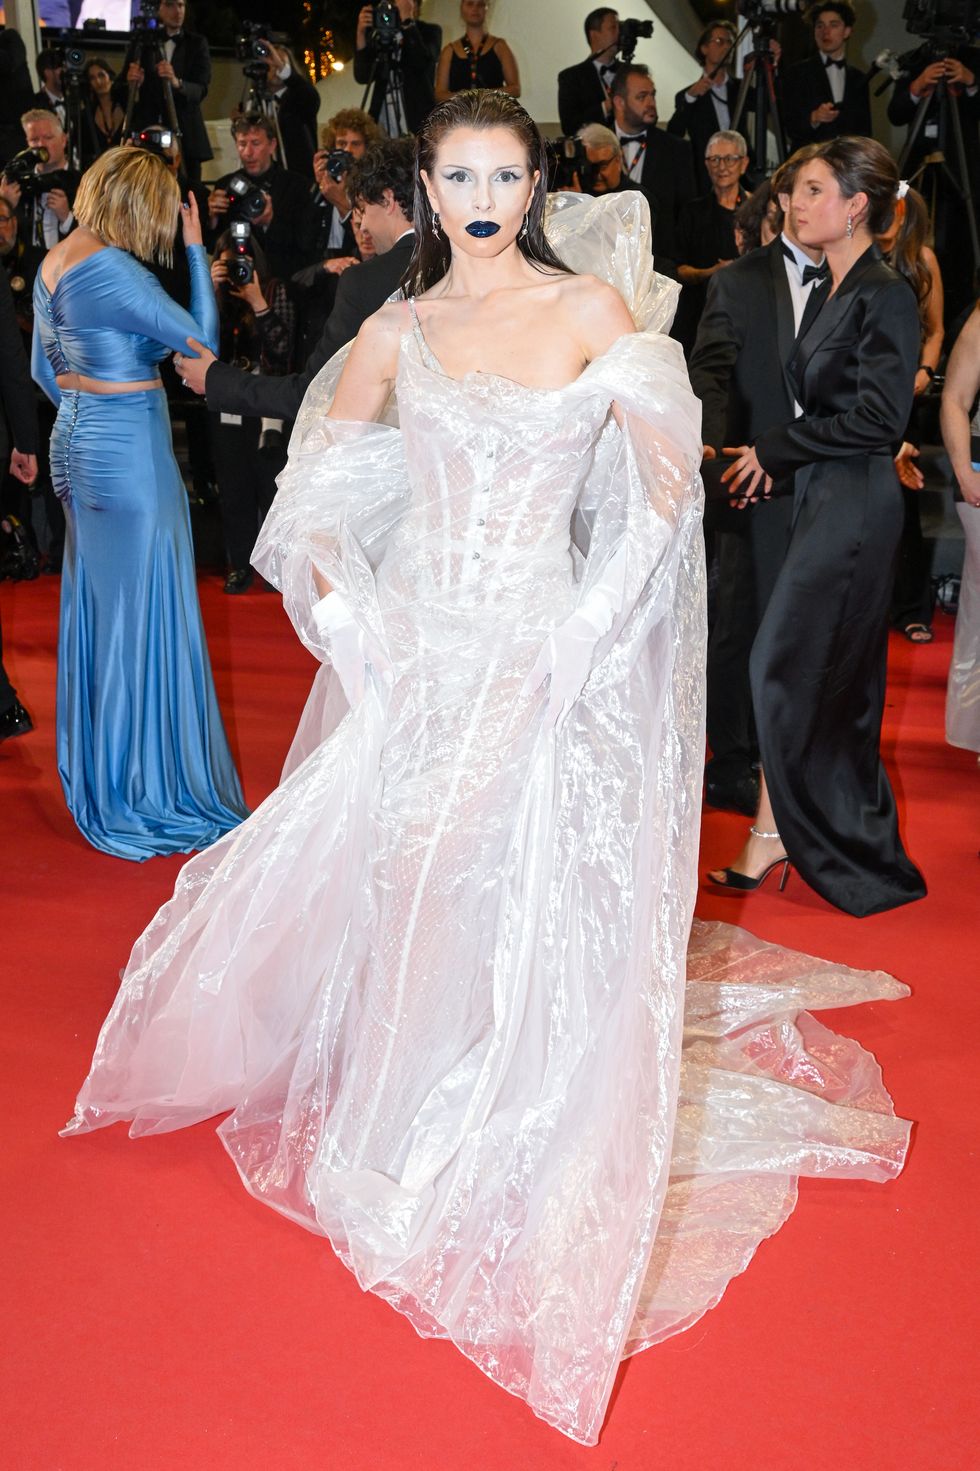 Julia Fox Wore Another SeeThrough RedCarpet Look At Cannes